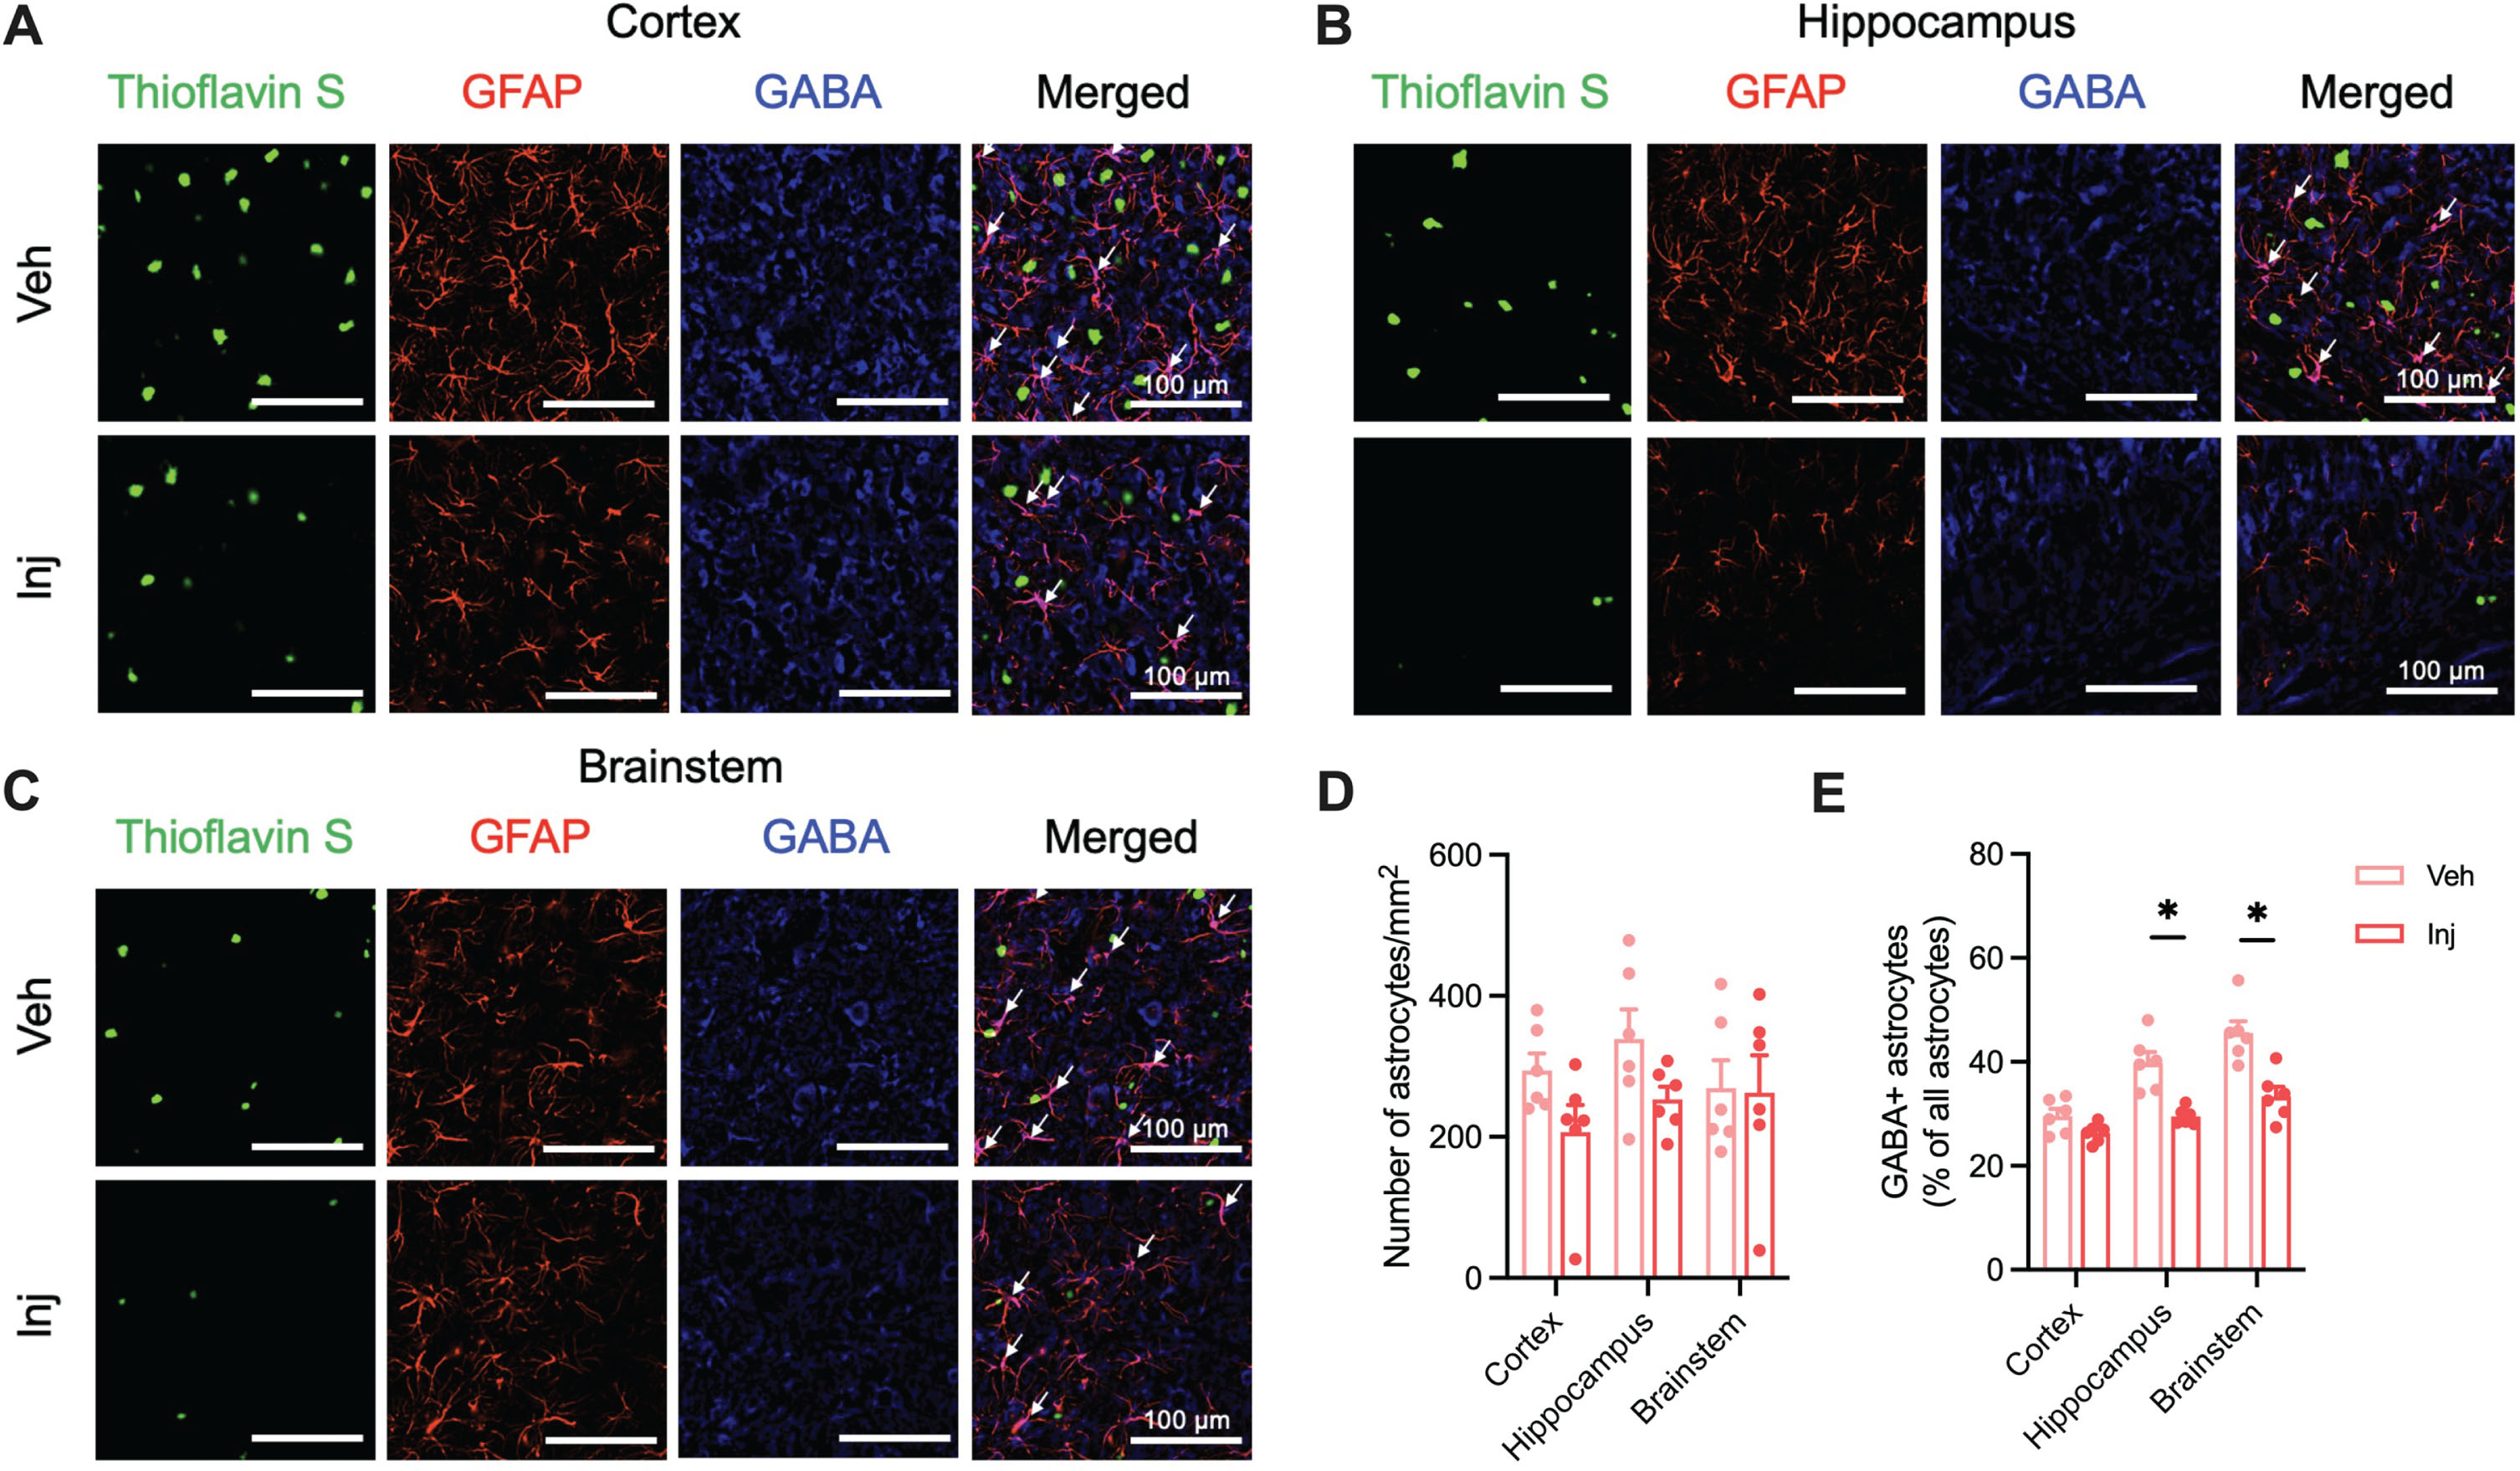 Vitamin D supplementation showed decreased GABA-positive reactive astrocytes in the AD model mice. A) Representative image of cortical Aβ plaques (Thioflavin S; Green), astrocytes (GFAP; Red), and GABA (Blue) in the primary motor cortex (Scale bar, 100μm) of Veh and Inj groups. There is colocalization between GFAP and GABA (white arrows). B) Representative images of Aβ plaques, astrocytes, and GABA in the hippocampus of two groups. There is colocalization between GFAP and GABA (white arrows). C) Representative images of Aβ plaques, astrocytes, and GABA in the nucleus tractus solitarius of two groups. There is colocalization between GFAP and GABA (white arrows). D) The number of astrocytes (GFAP + cells) per unit area in the cortex, hippocampus, and brainstem. E) Colocalization of GABA-positive astrocytes in the cortex, hippocampus, and brainstem. Data are presented as mean±SEM. *p < 0.05 by Student’s t-test or Mann-Whitney test. Aβ, amyloid-β; GFAP, glial fibrillary acidic protein; GABA, gamma-aminobutyric acid; Veh, vehicle-injected 5XFAD mice (n = 6); Inj, vitamin D-injected 5XFAD mice (n = 6).